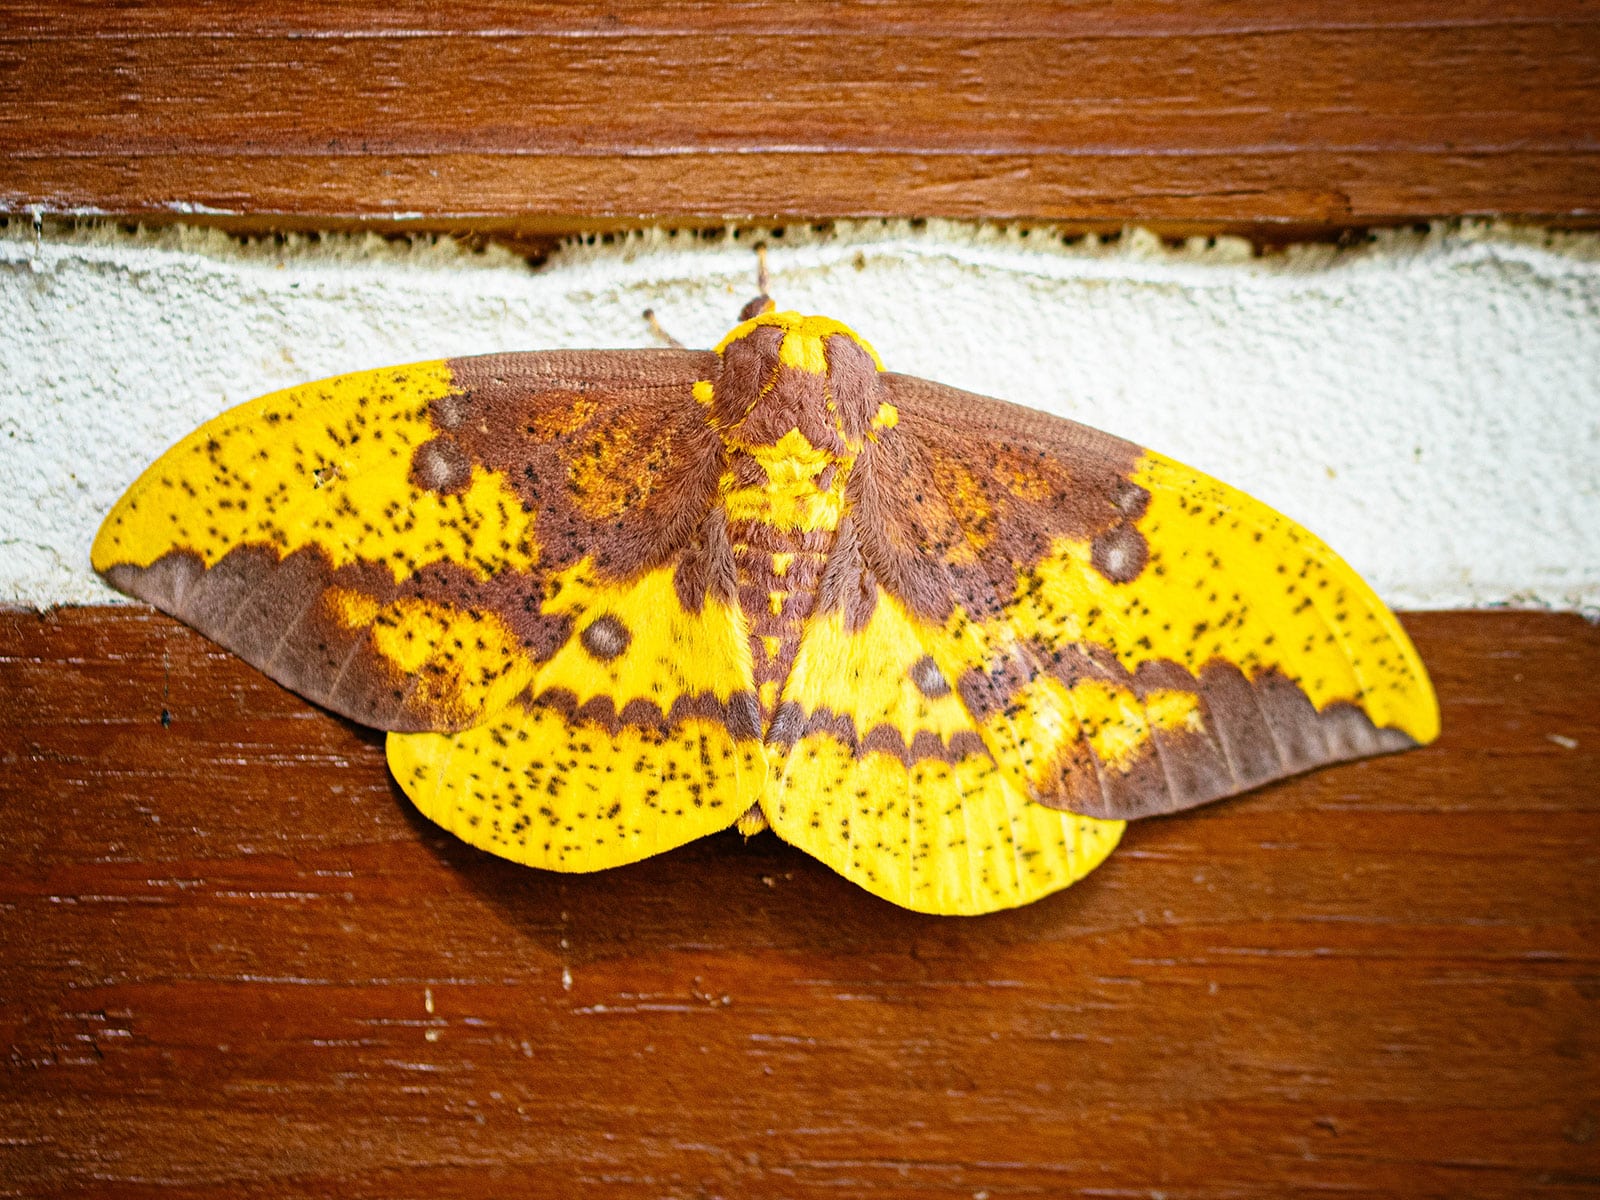 Imperial moth resting on the side of a house with brown and white siding